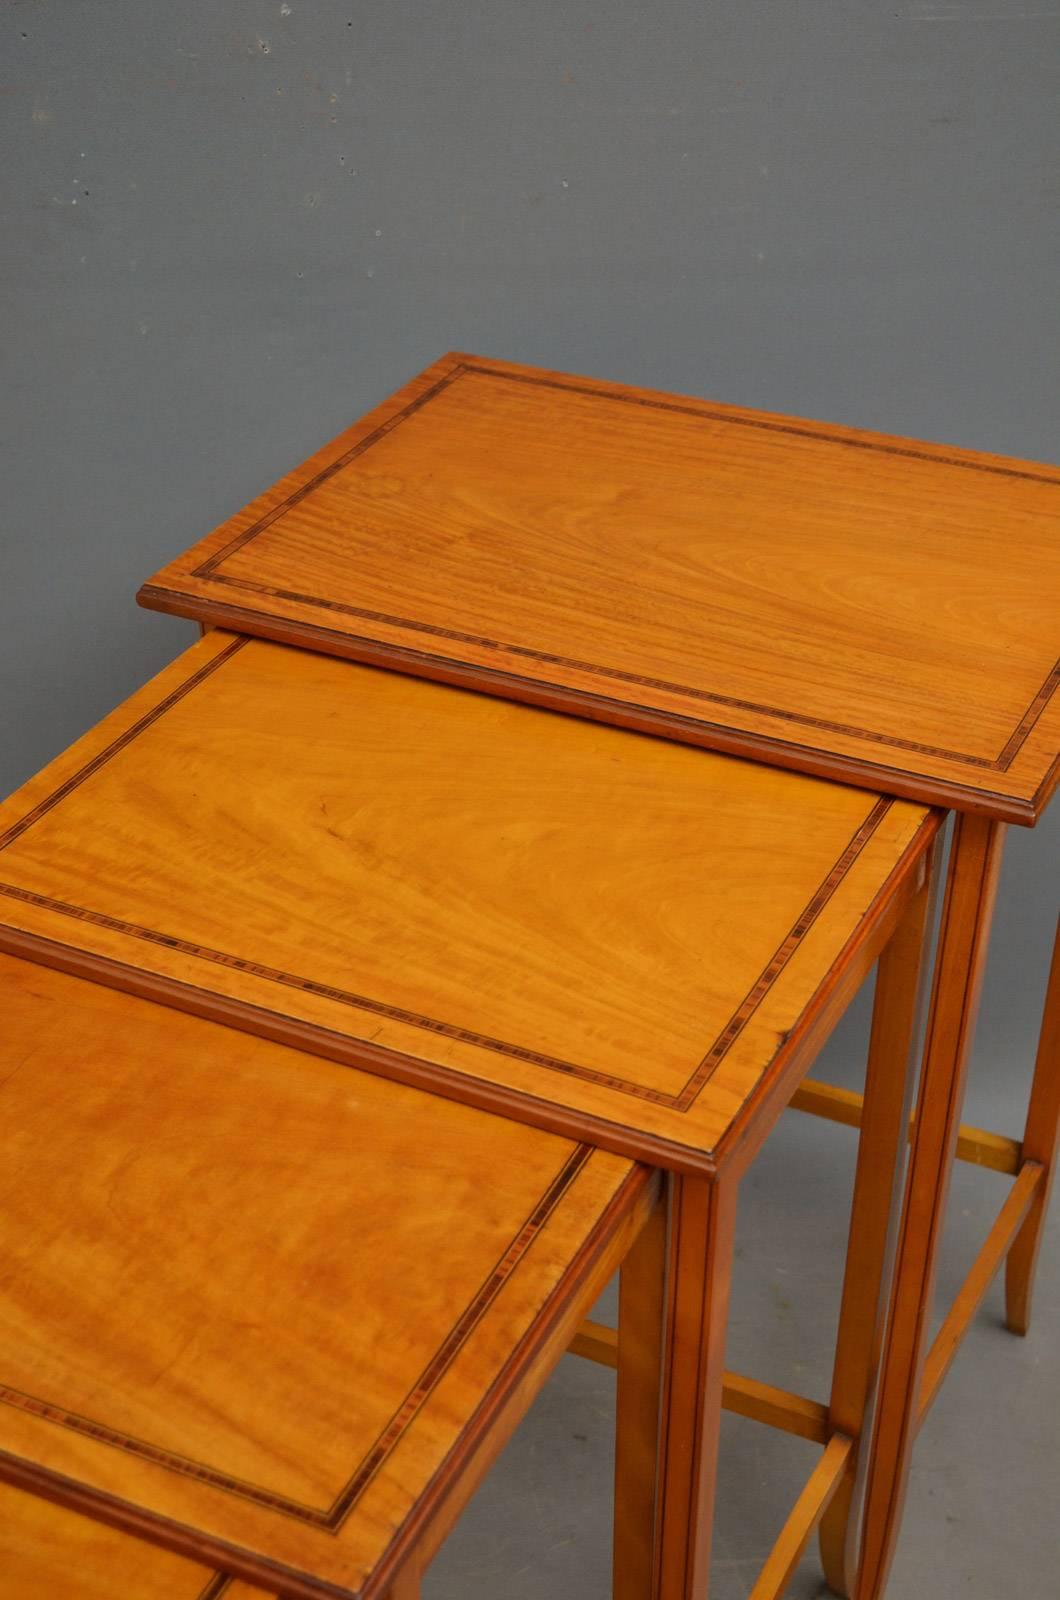 Edwardian Satinwood Quartetto Nest of Tables In Excellent Condition For Sale In Whaley Bridge, GB